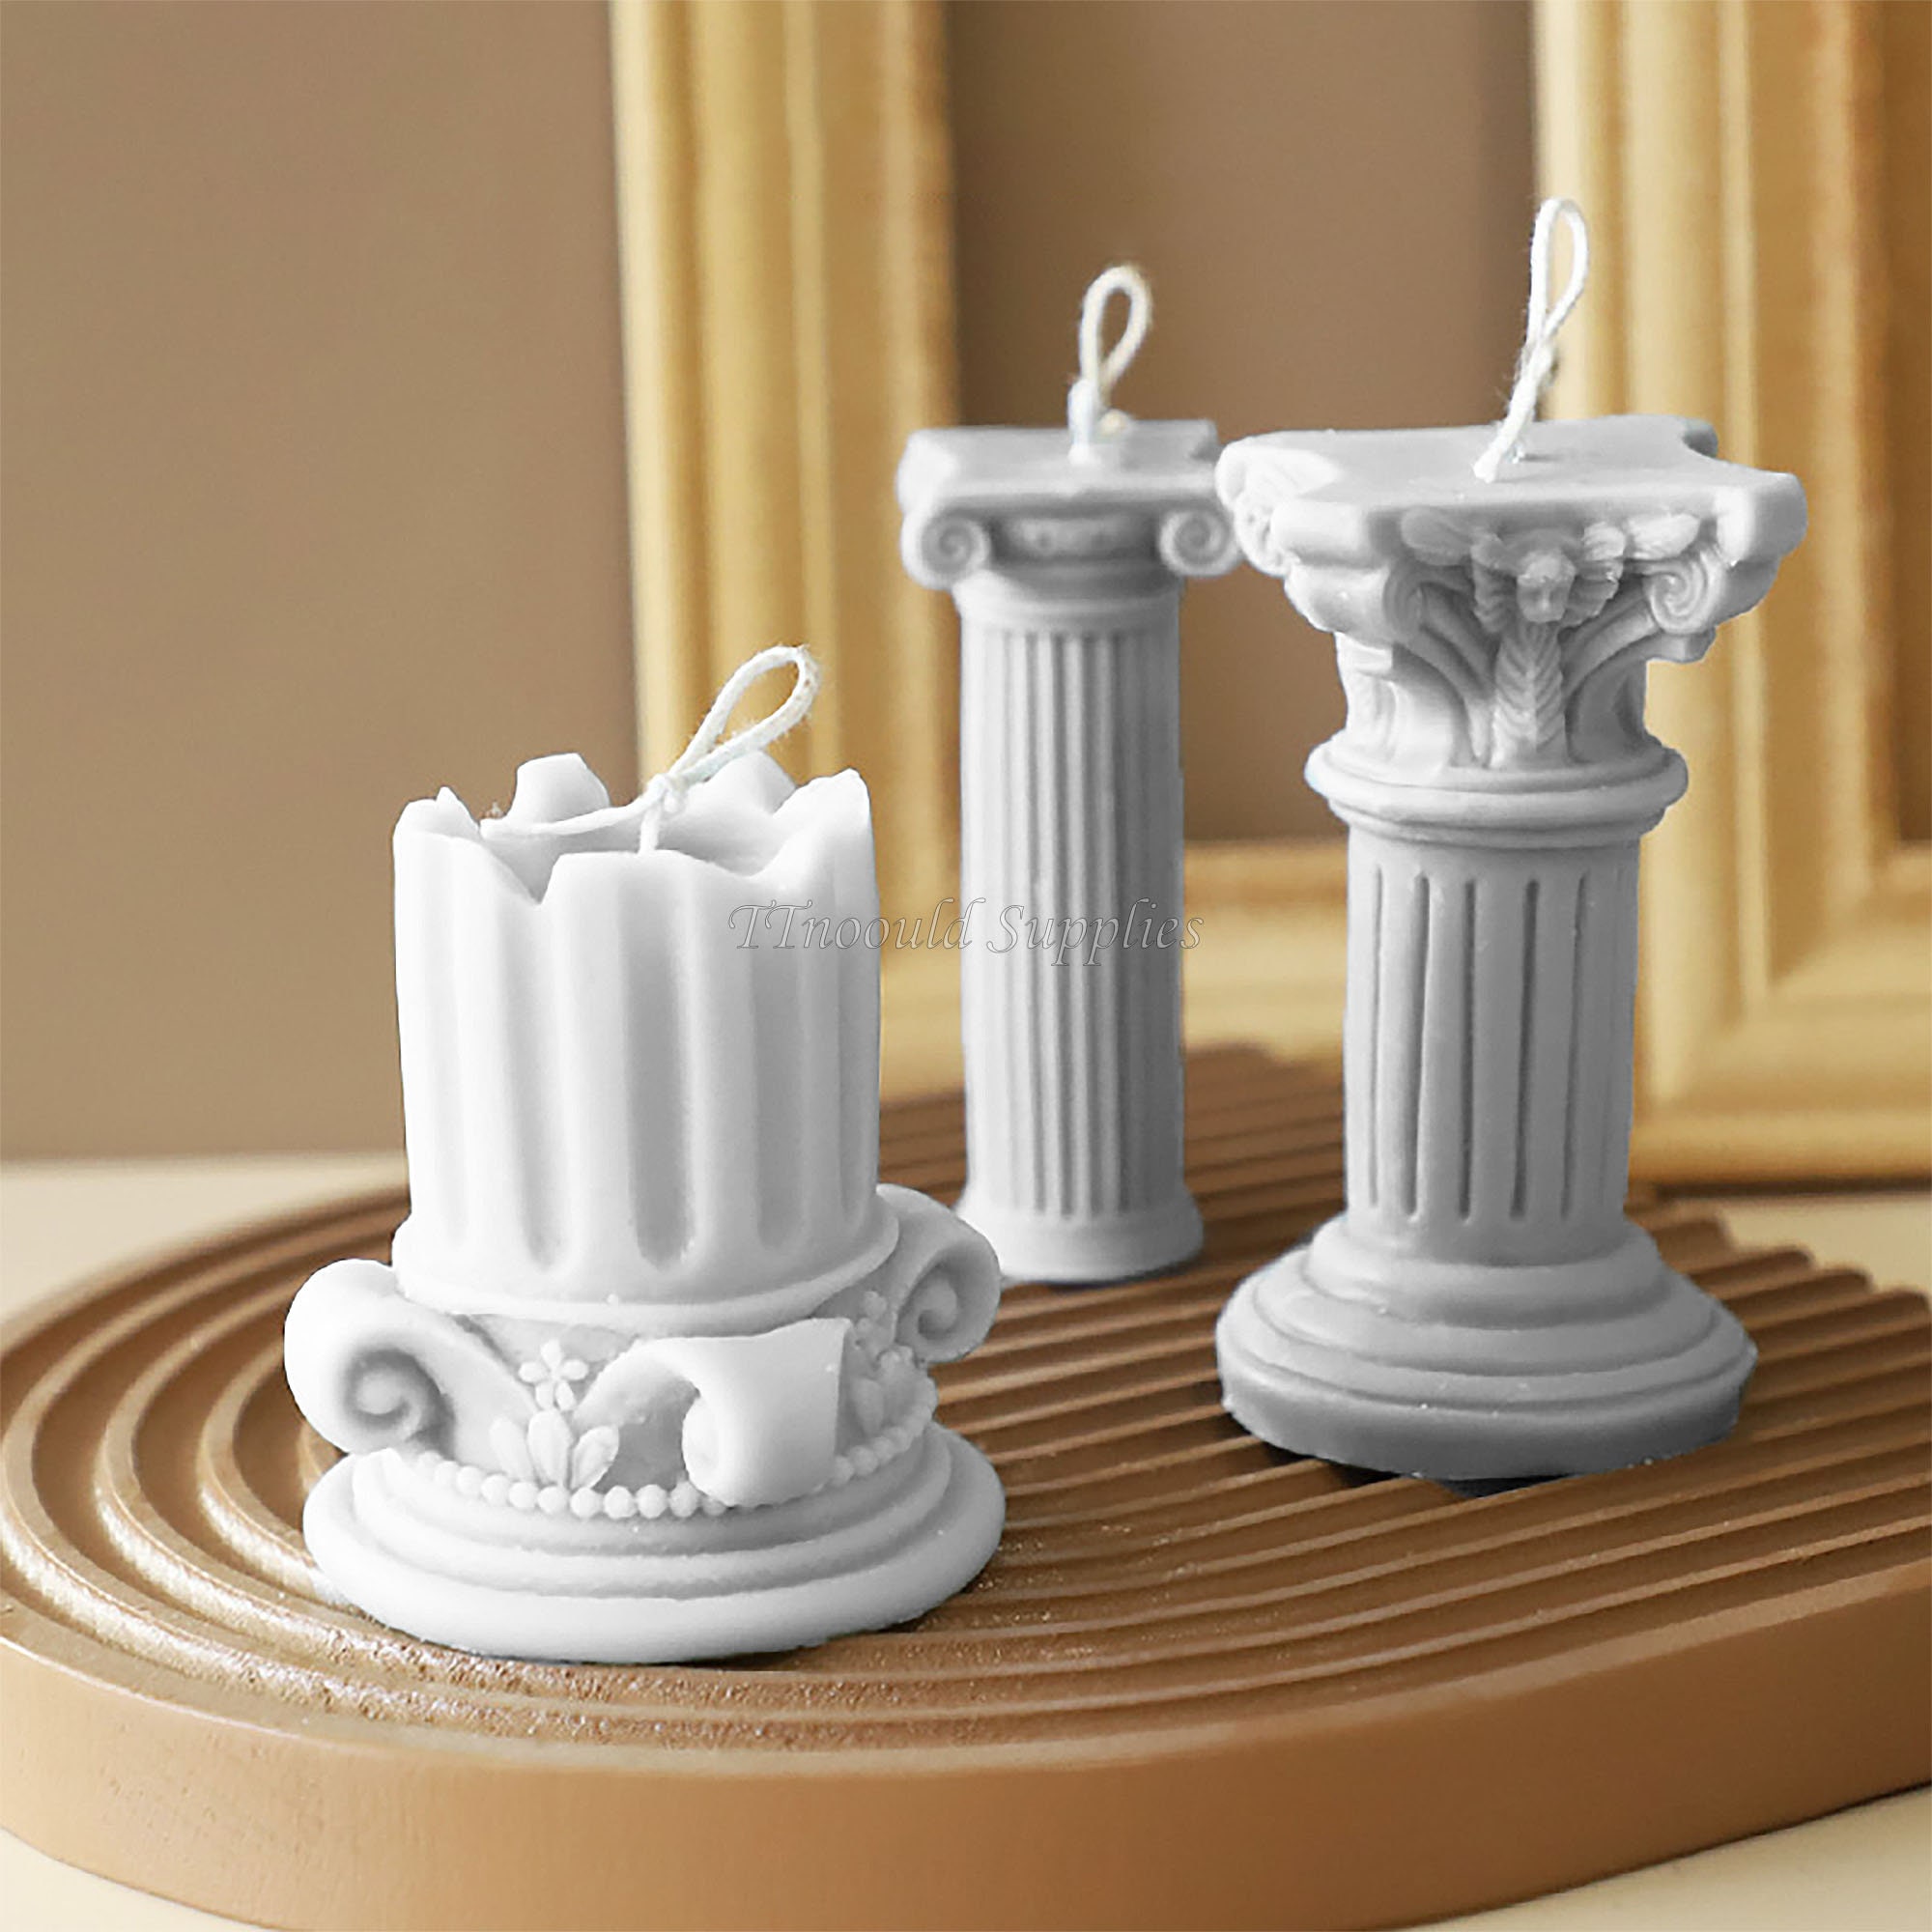 Diy Wave Pillar Candle Molds Twirl Twist Column Scented Candle